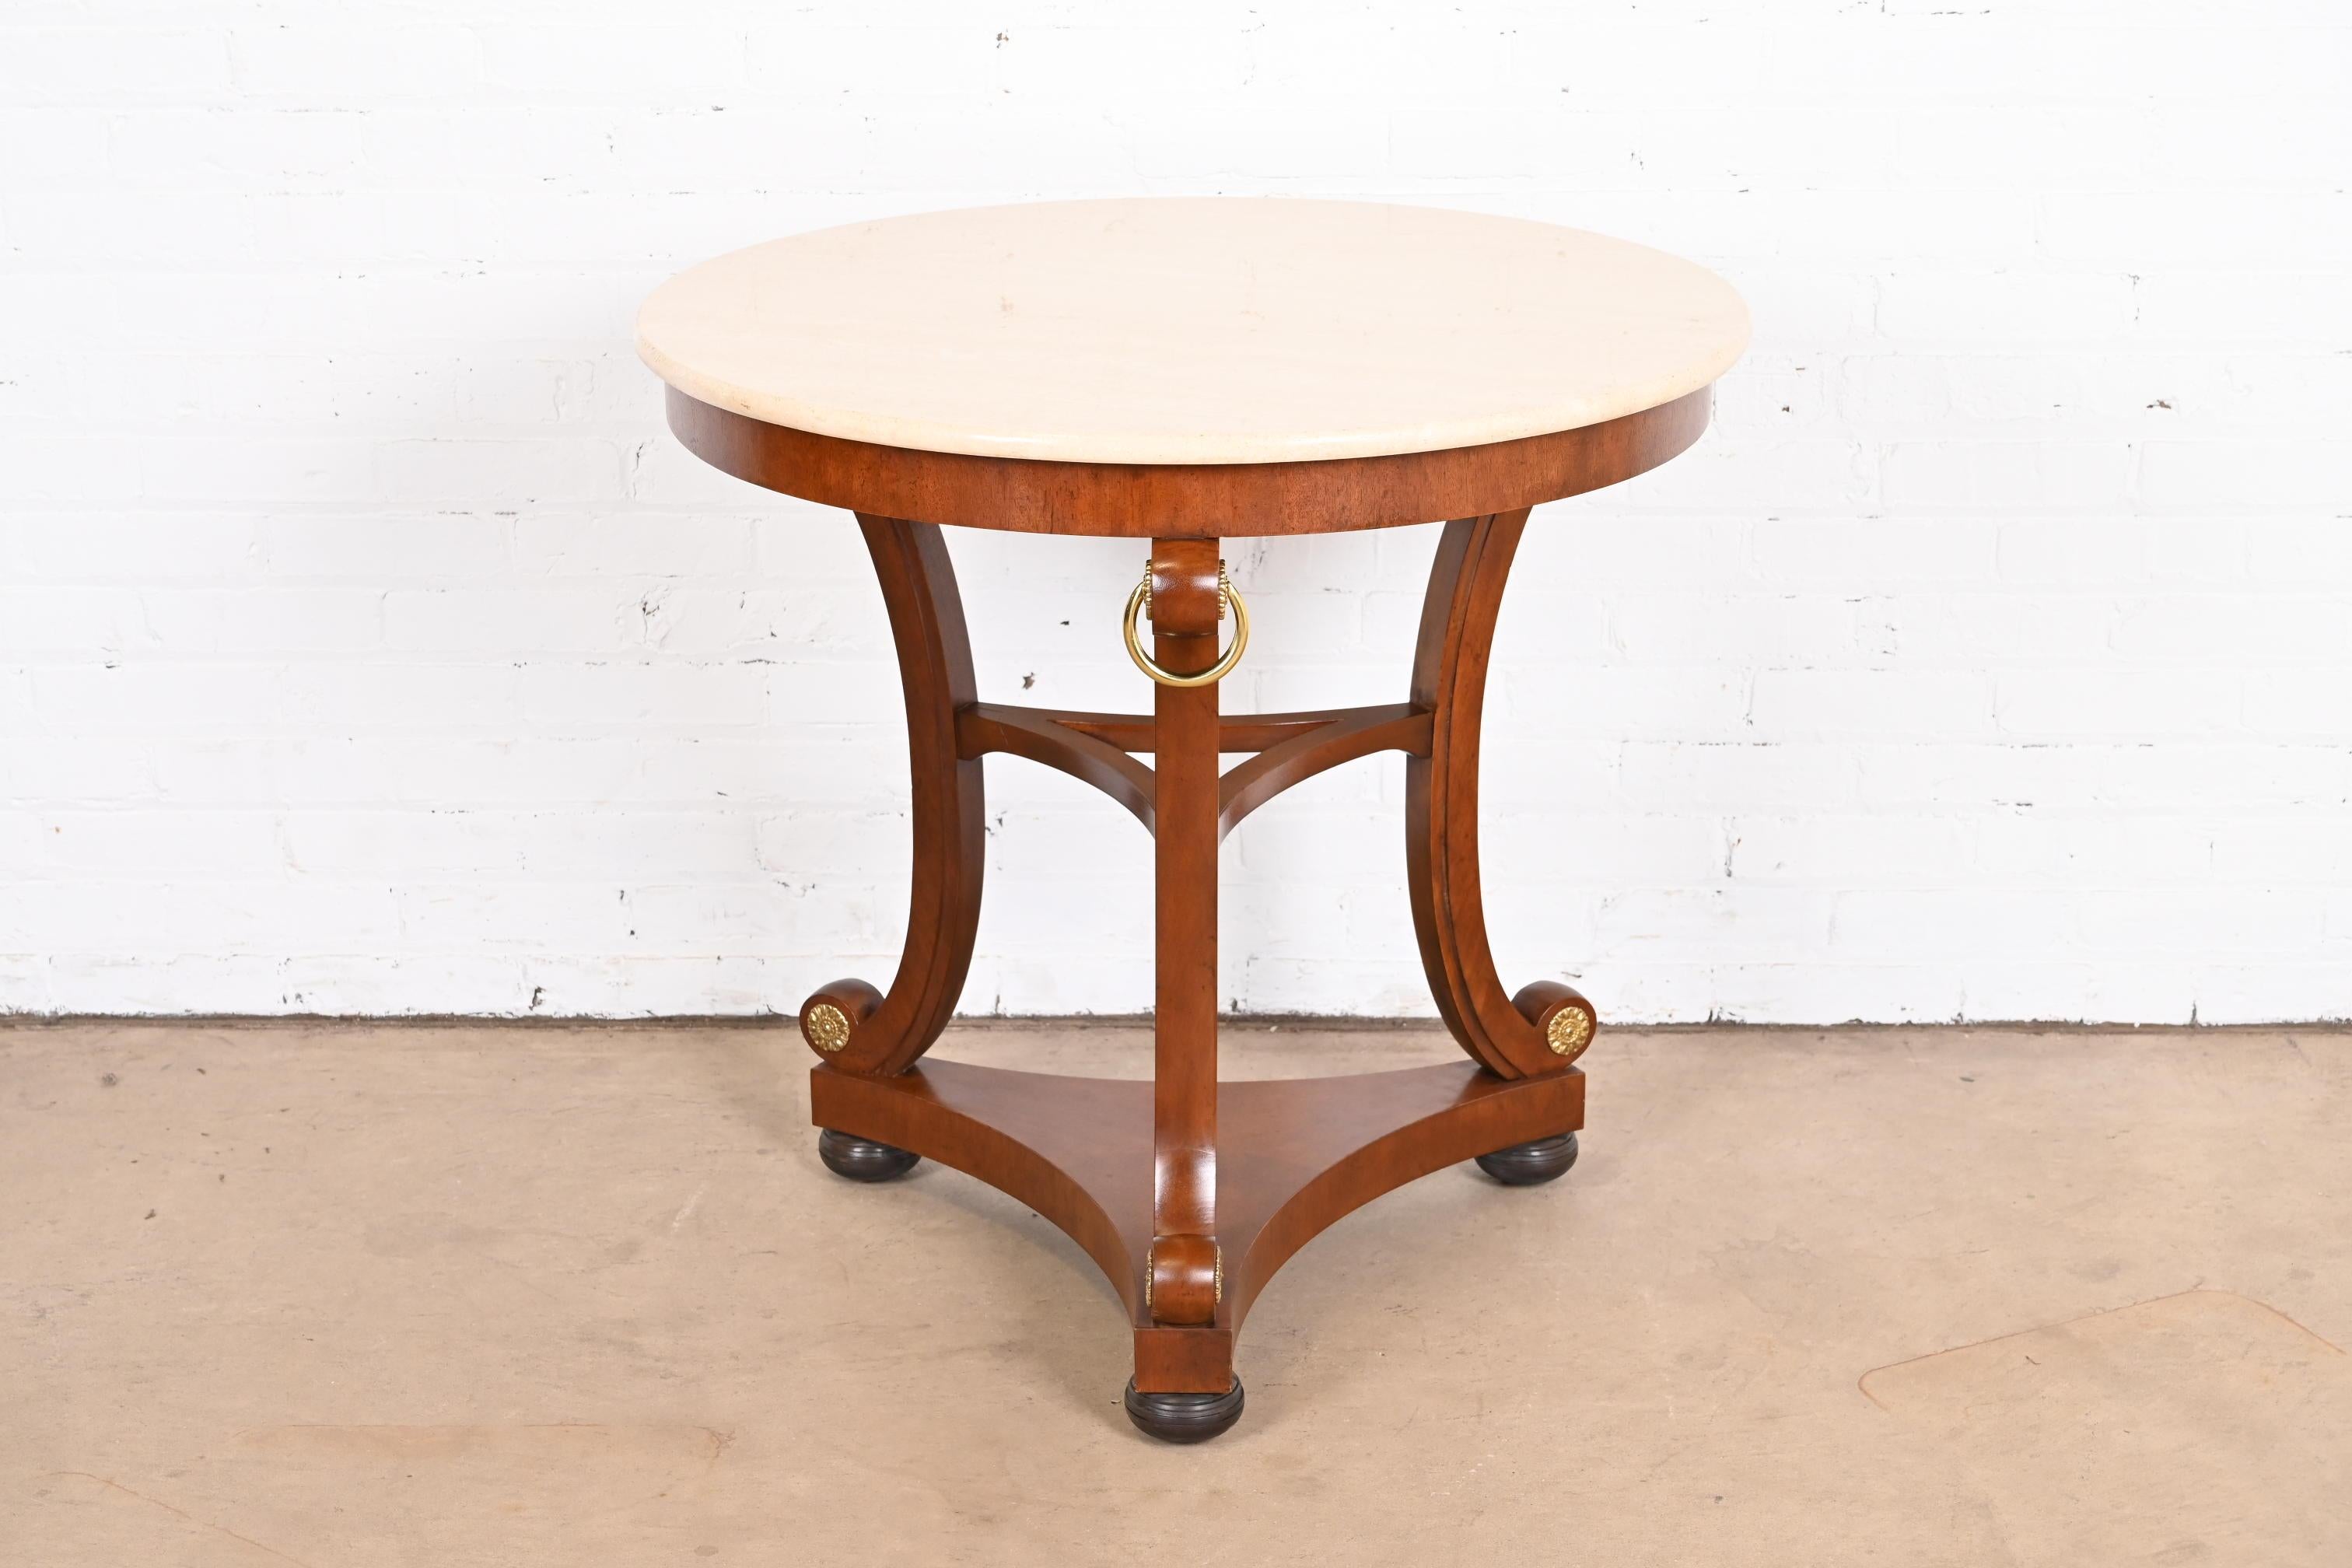 An exceptional Regency or Empire style tea table or center table

By Baker Furniture, 